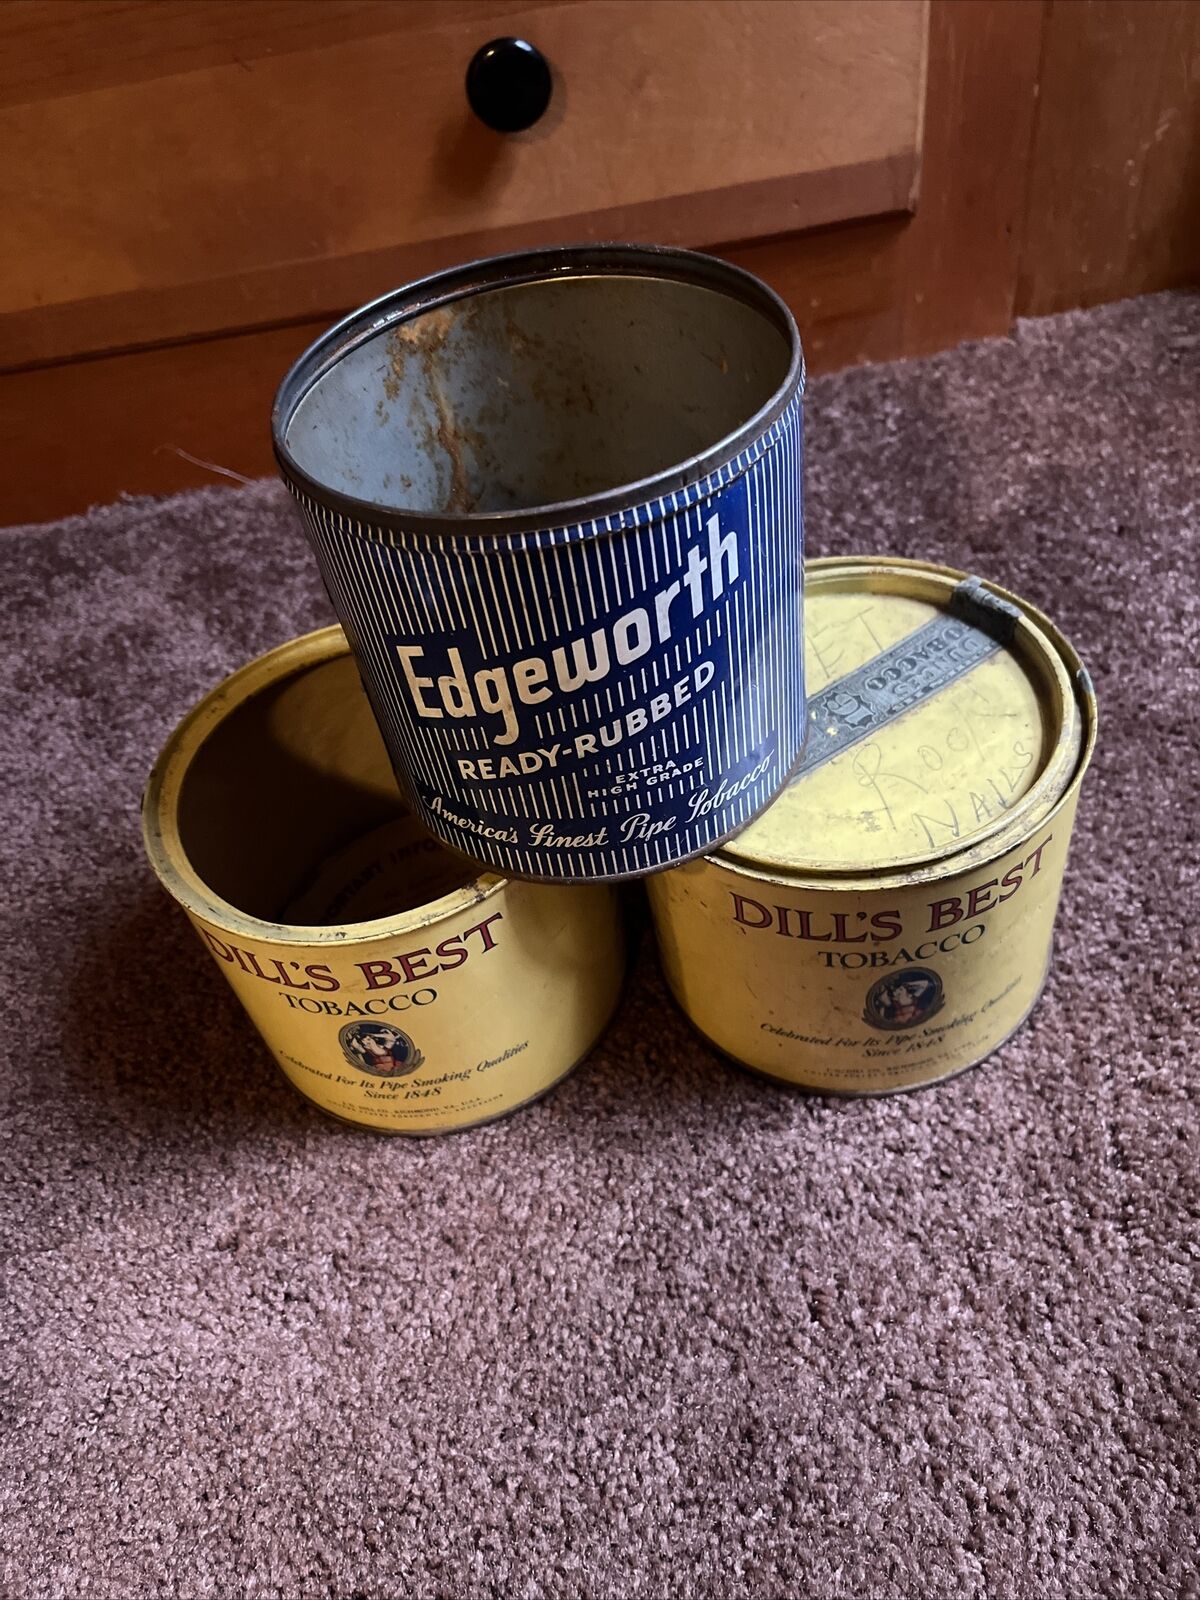 Dills Best And Edgeworth Tobacco Canisters